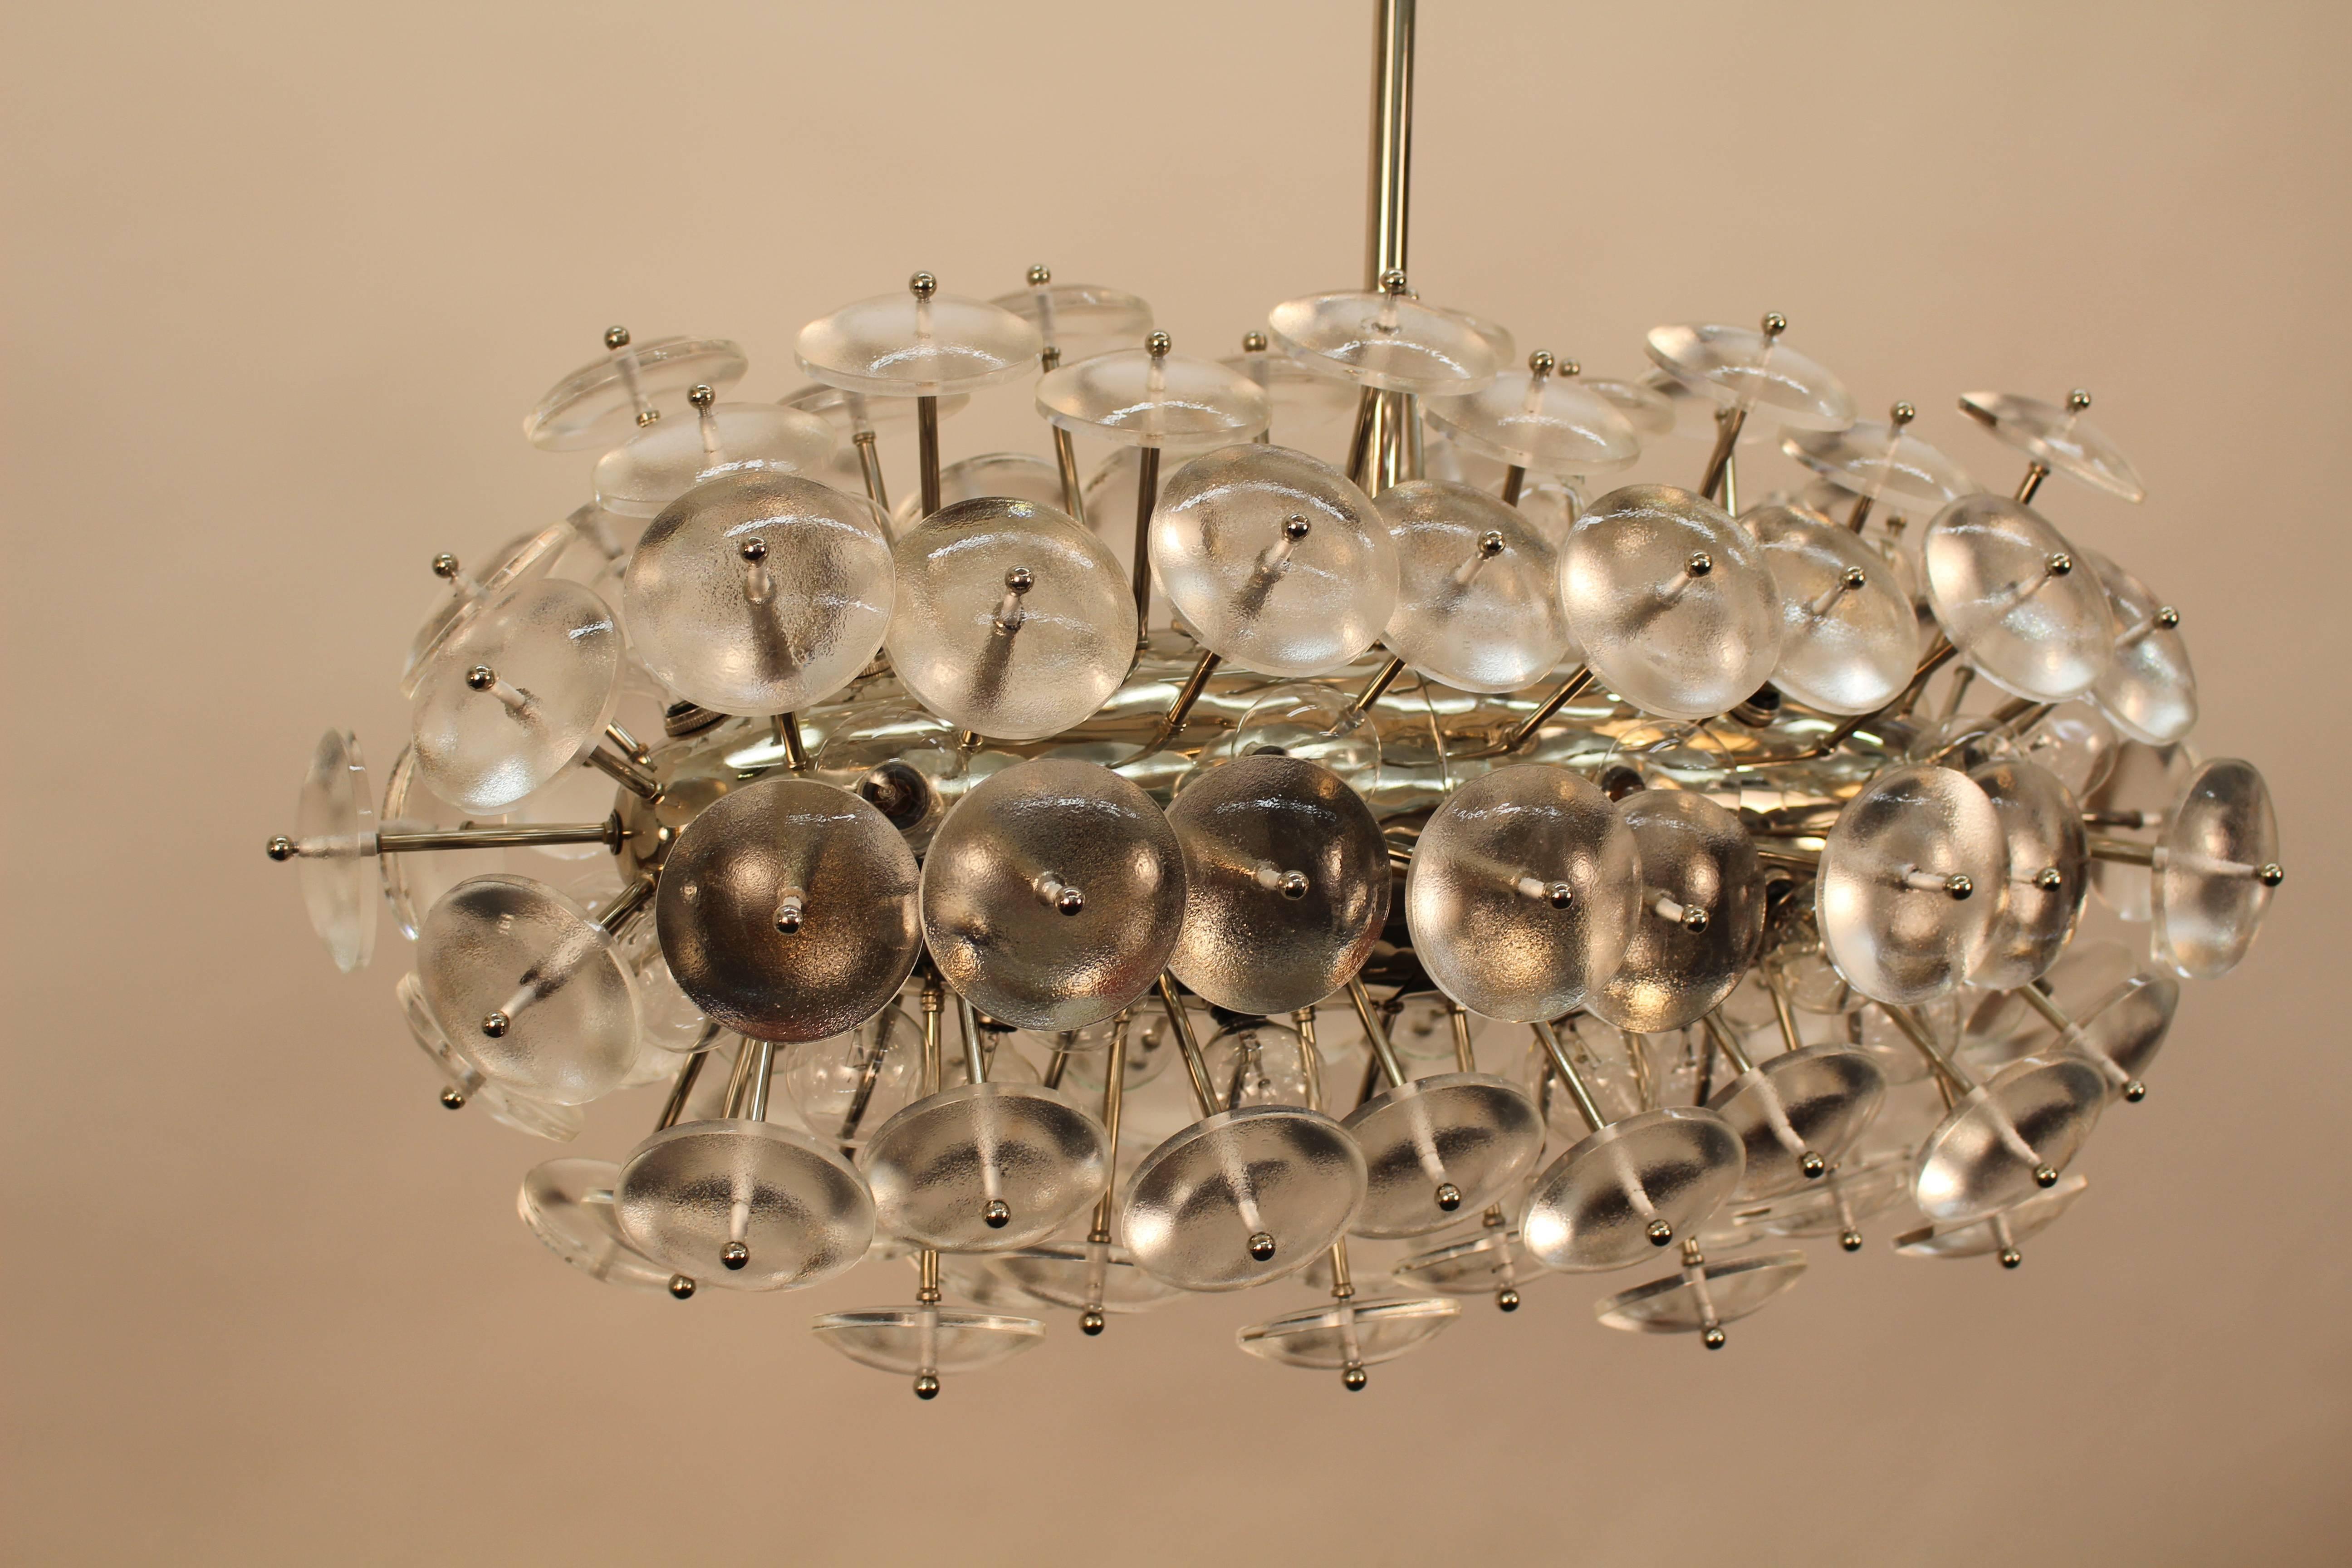 Custom-made Sputnik chandelier composed of thick glass lenses in nickel finish. 32 sockets inserted on main body.
Max. capacity is 15 watts per socket. Total 480 watts.
Made to order. Brass finish available.